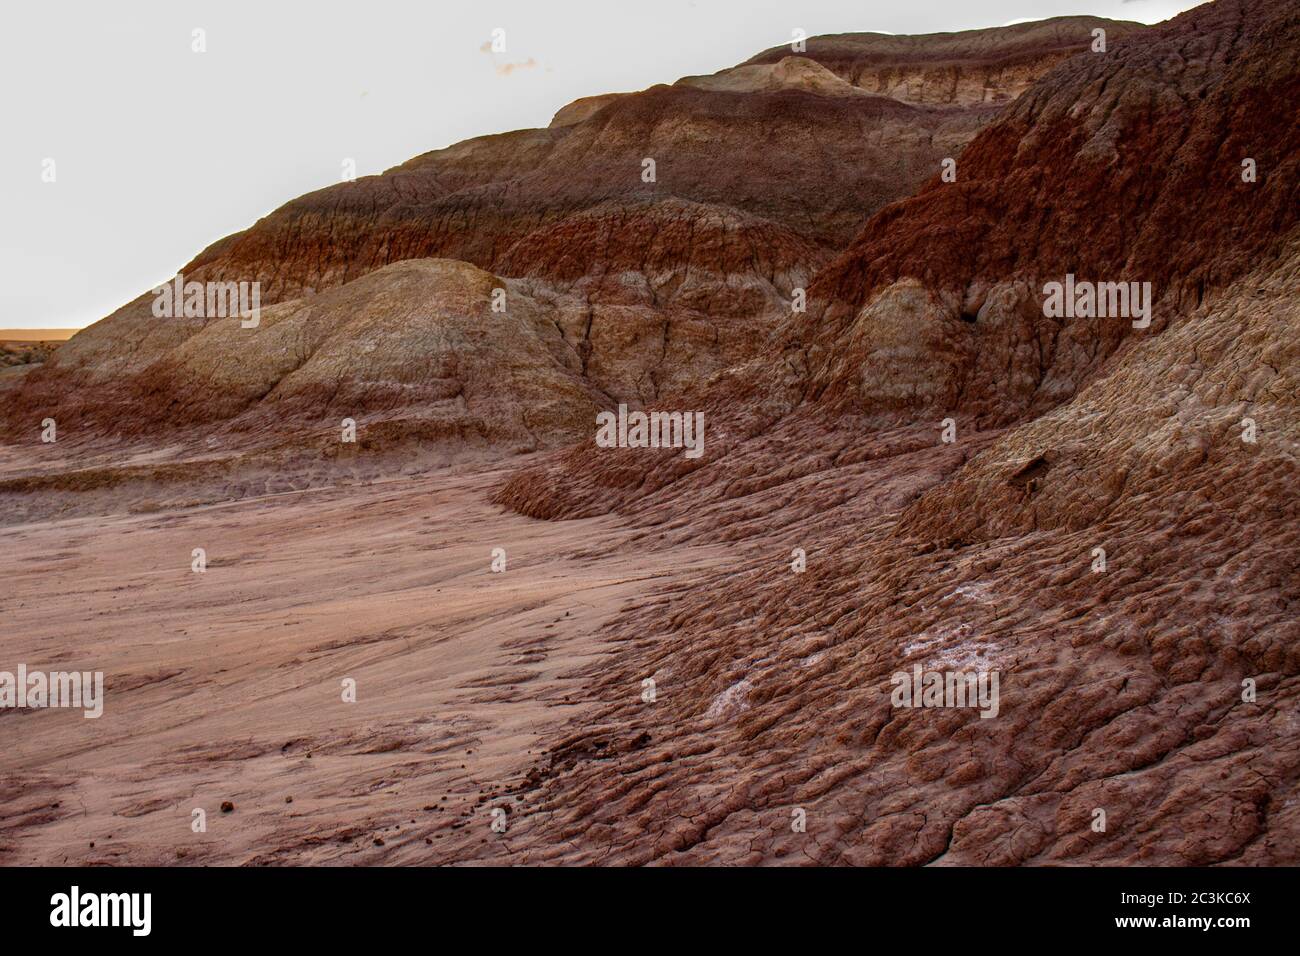 Cracked mud and layered mineral deposits at sunset in the Bisti Badlands, De-Na-Zin Wilderness, New Mexico Stock Photo